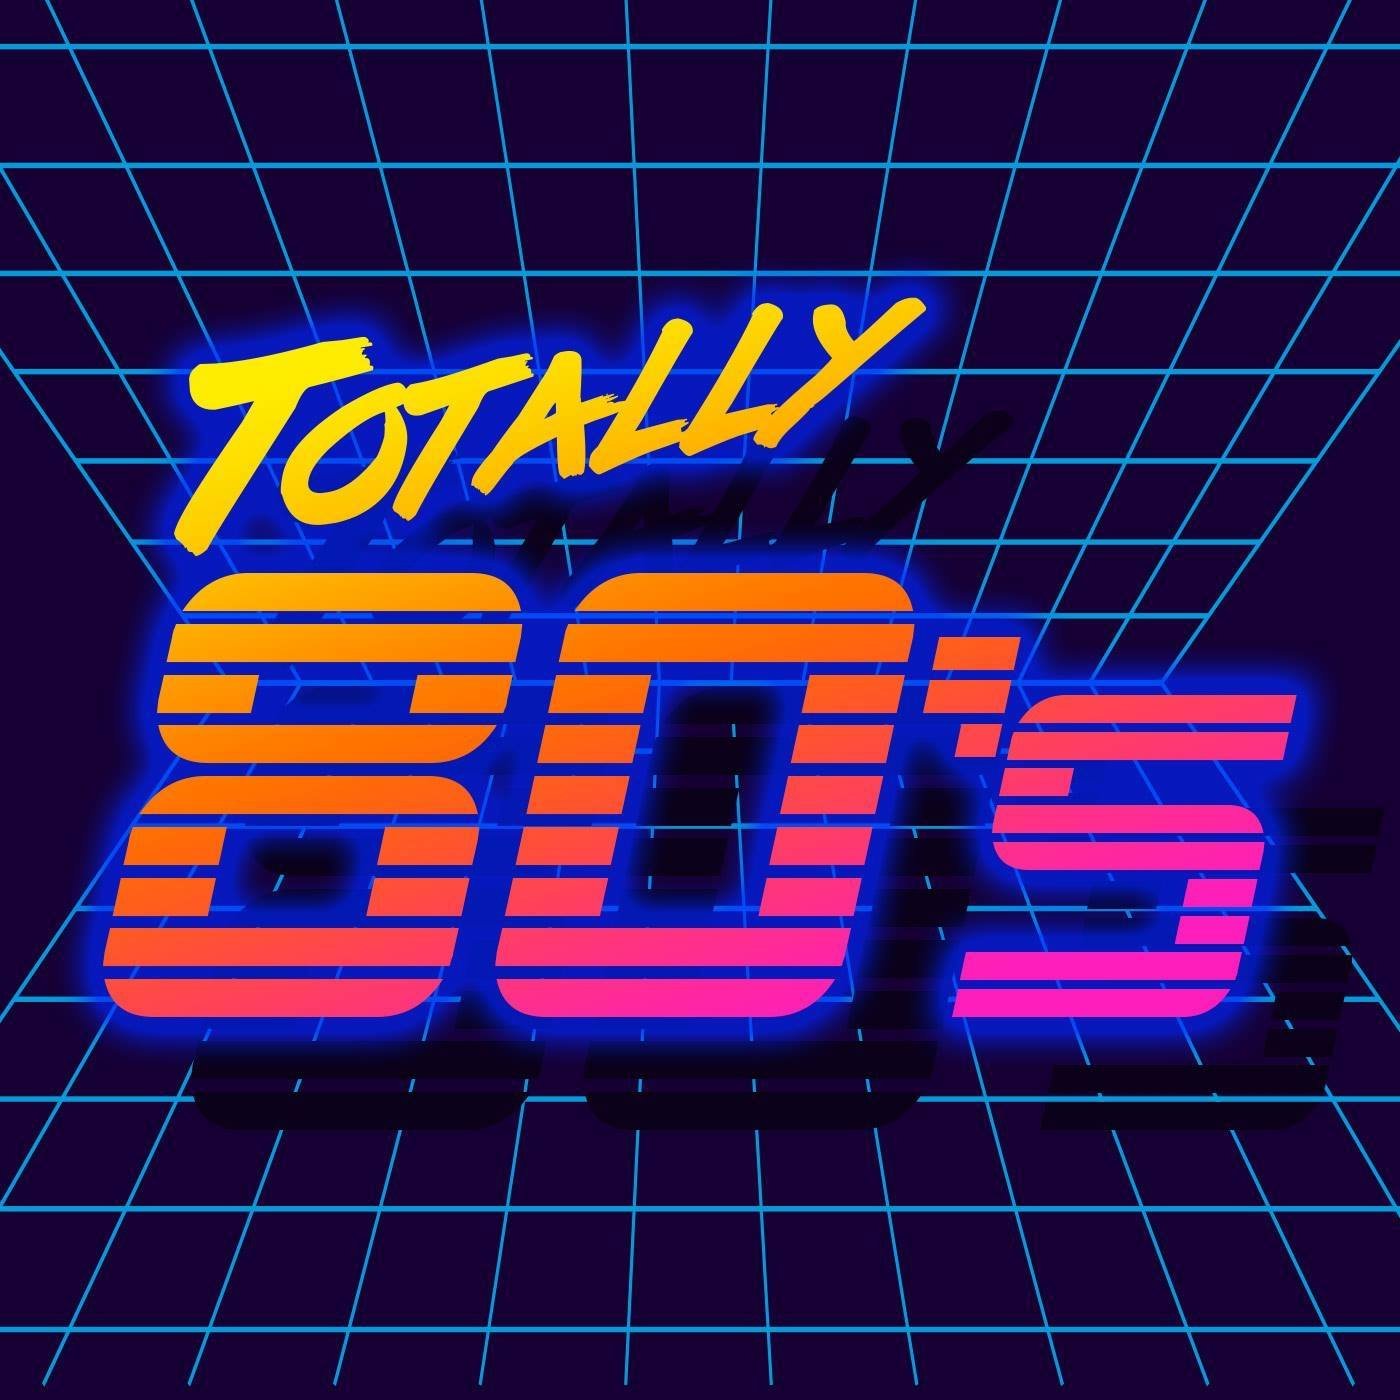 It may be 2020, but we are still listening to music of the 80s! 👨‍🎤Madonna, Phil Collins, Wham!, Journey, (and all other 80s) still have my ❤️